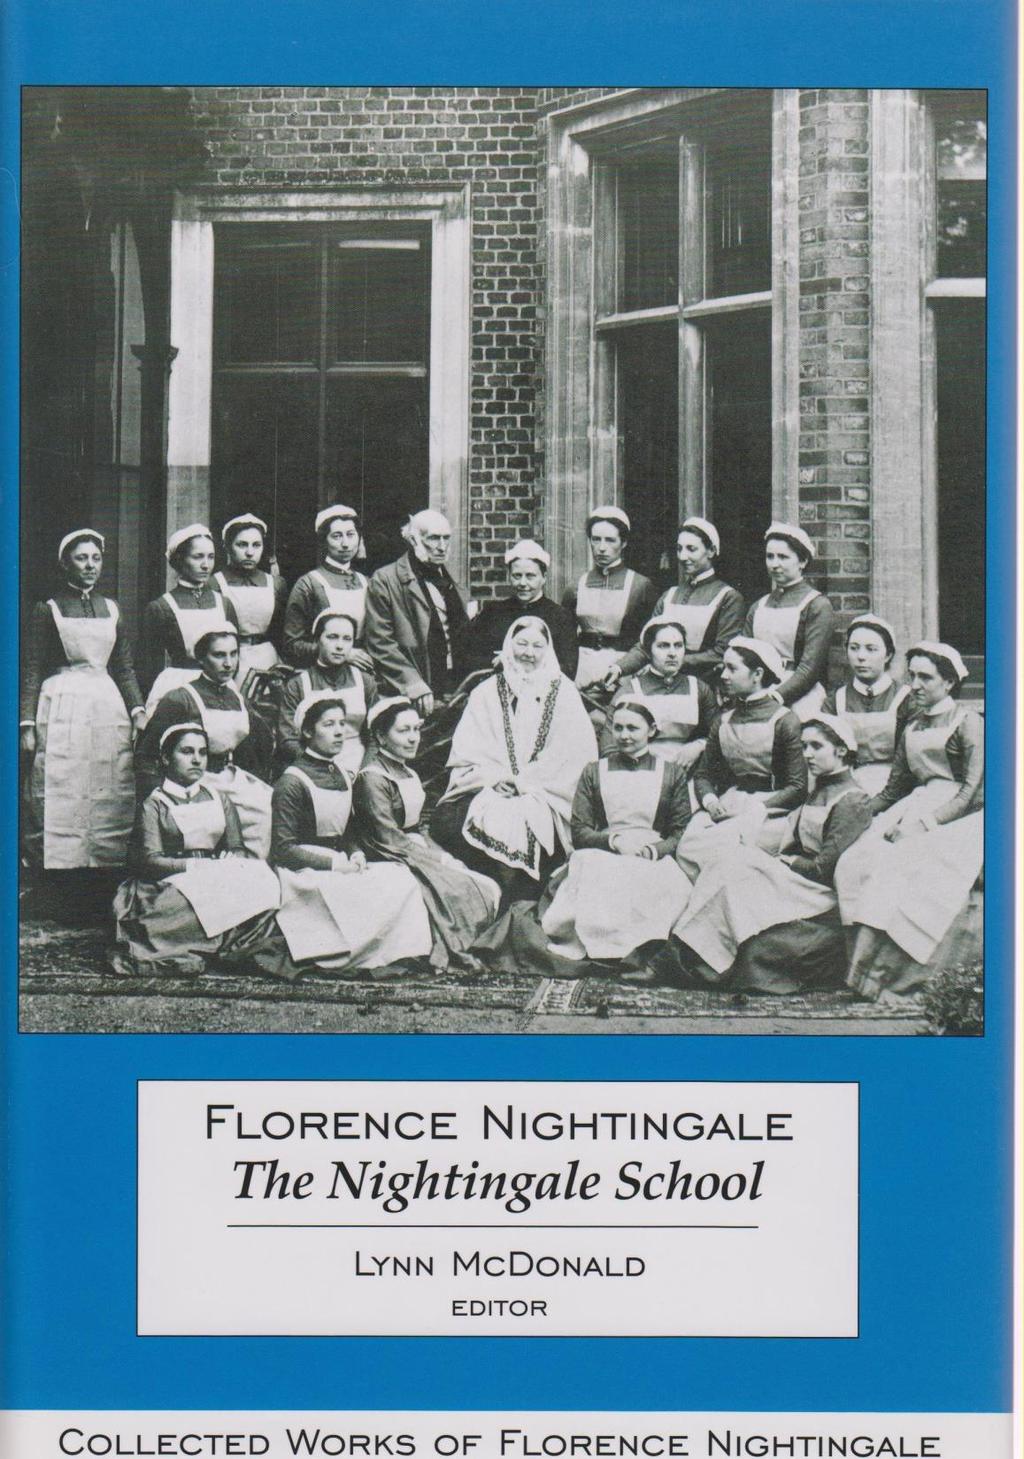 Vol. 12 in CWFN series, with letters to matron and nurses at the N School from its beginning Picture of FN at Claydon House, Bucks, on